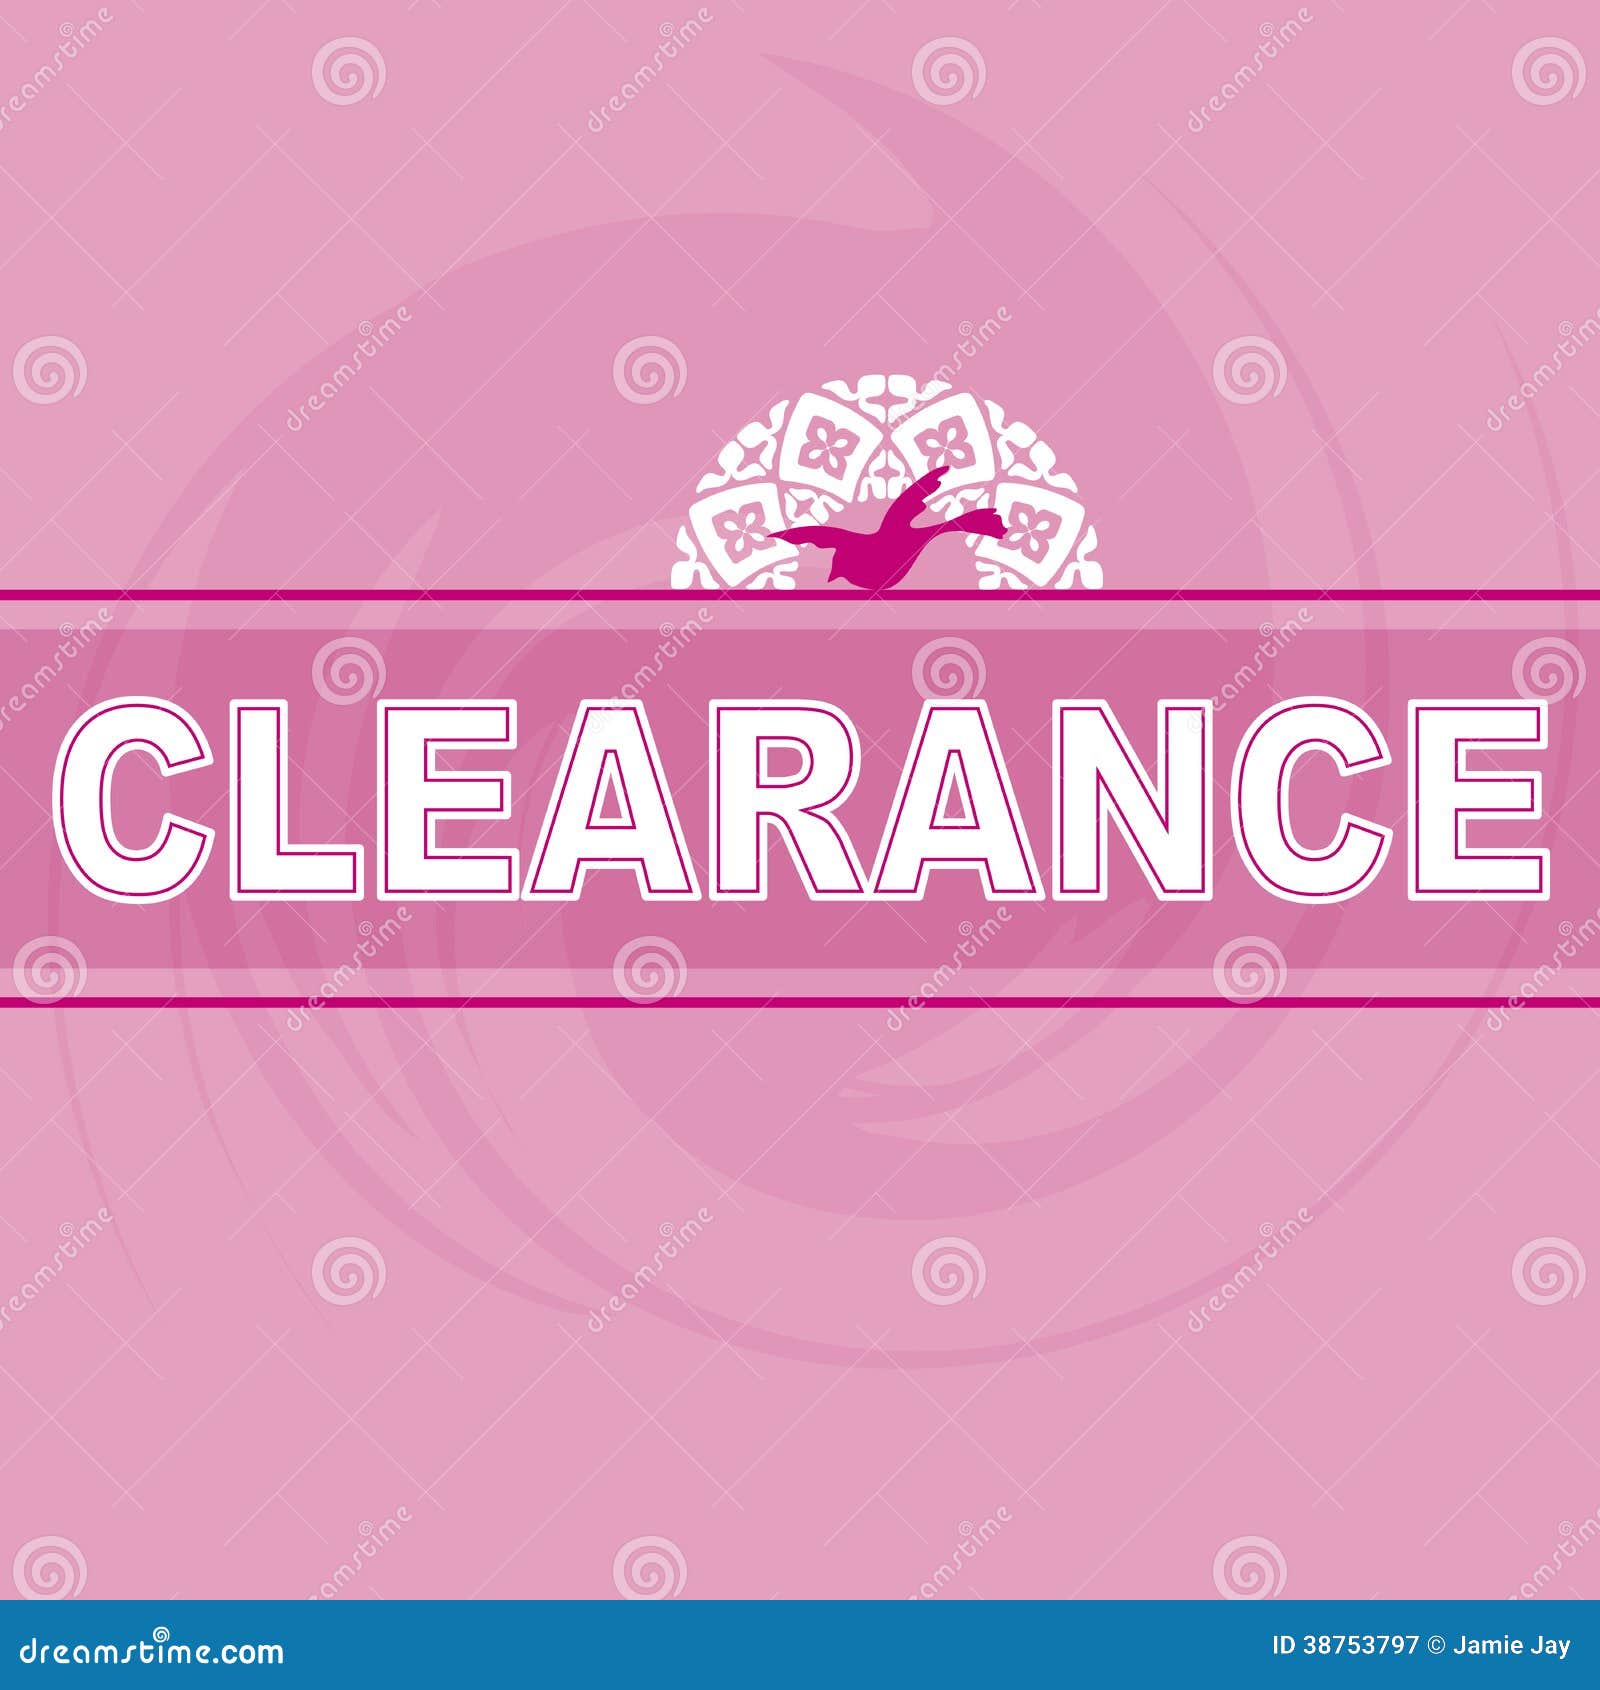 Big Winter Sale Poster With CLEARANCE SALE Text. Advertising Pink